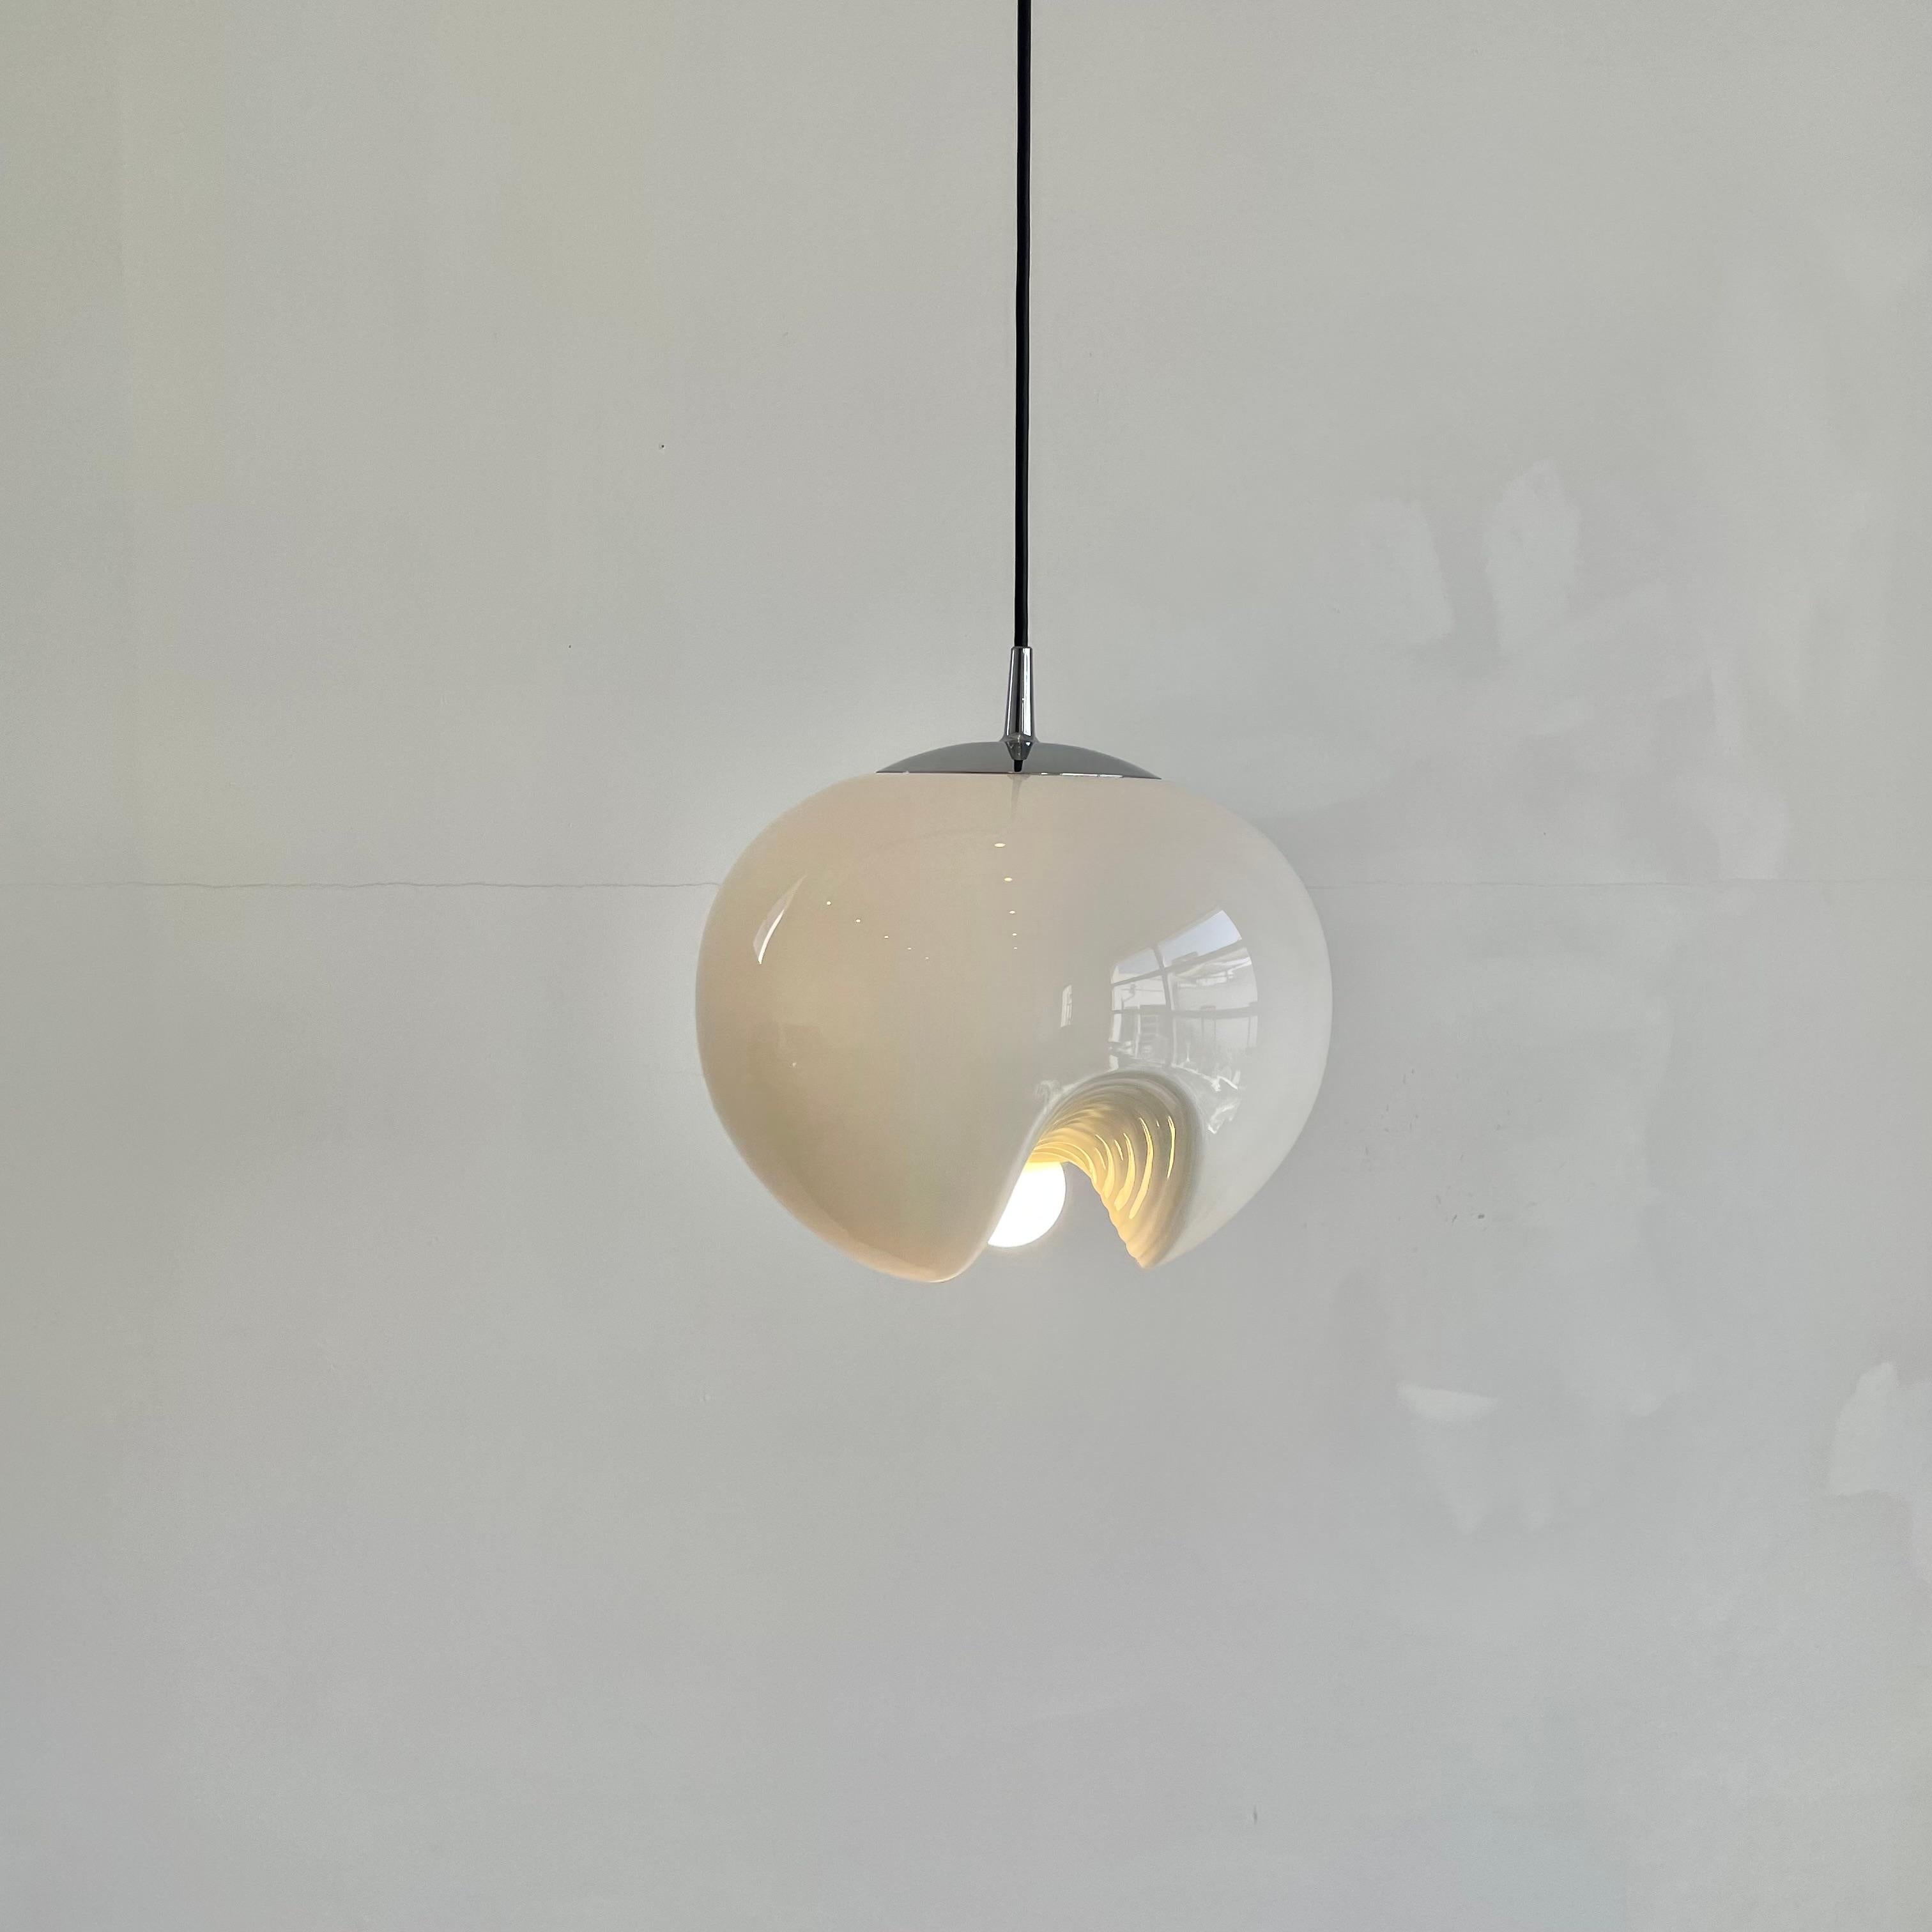 Beautiful German hanging ' Wave' pendant light by Piell and Putzler with a milky glass globe diffusor. The bulb sits in the middle of a confluence of 3 ridged glass valleys on the bottom of the globe. Glass illuminates beautifully. Great laying on